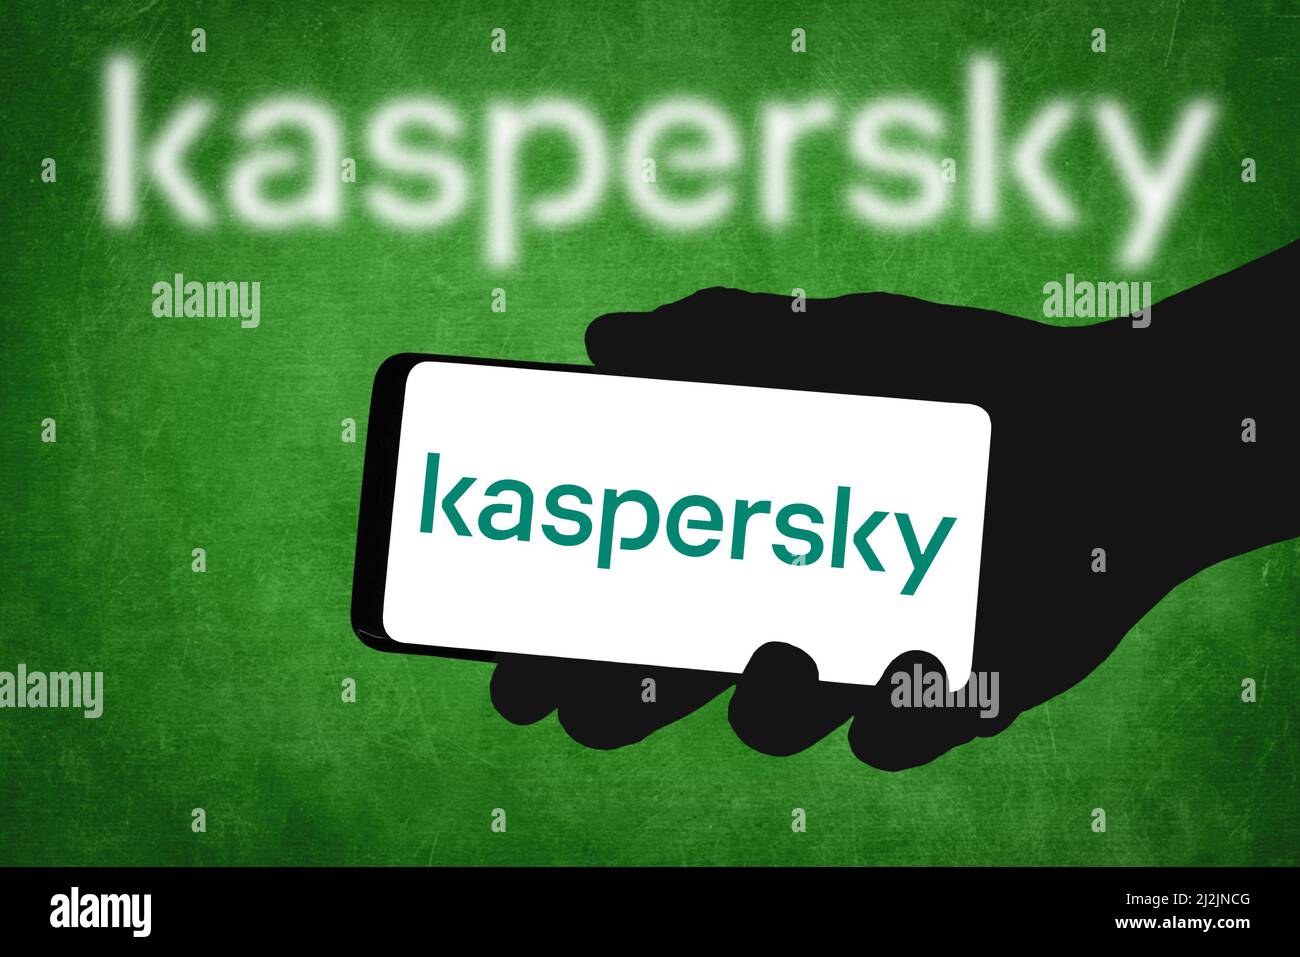 Kaspersky Lab computer software Stock Photo